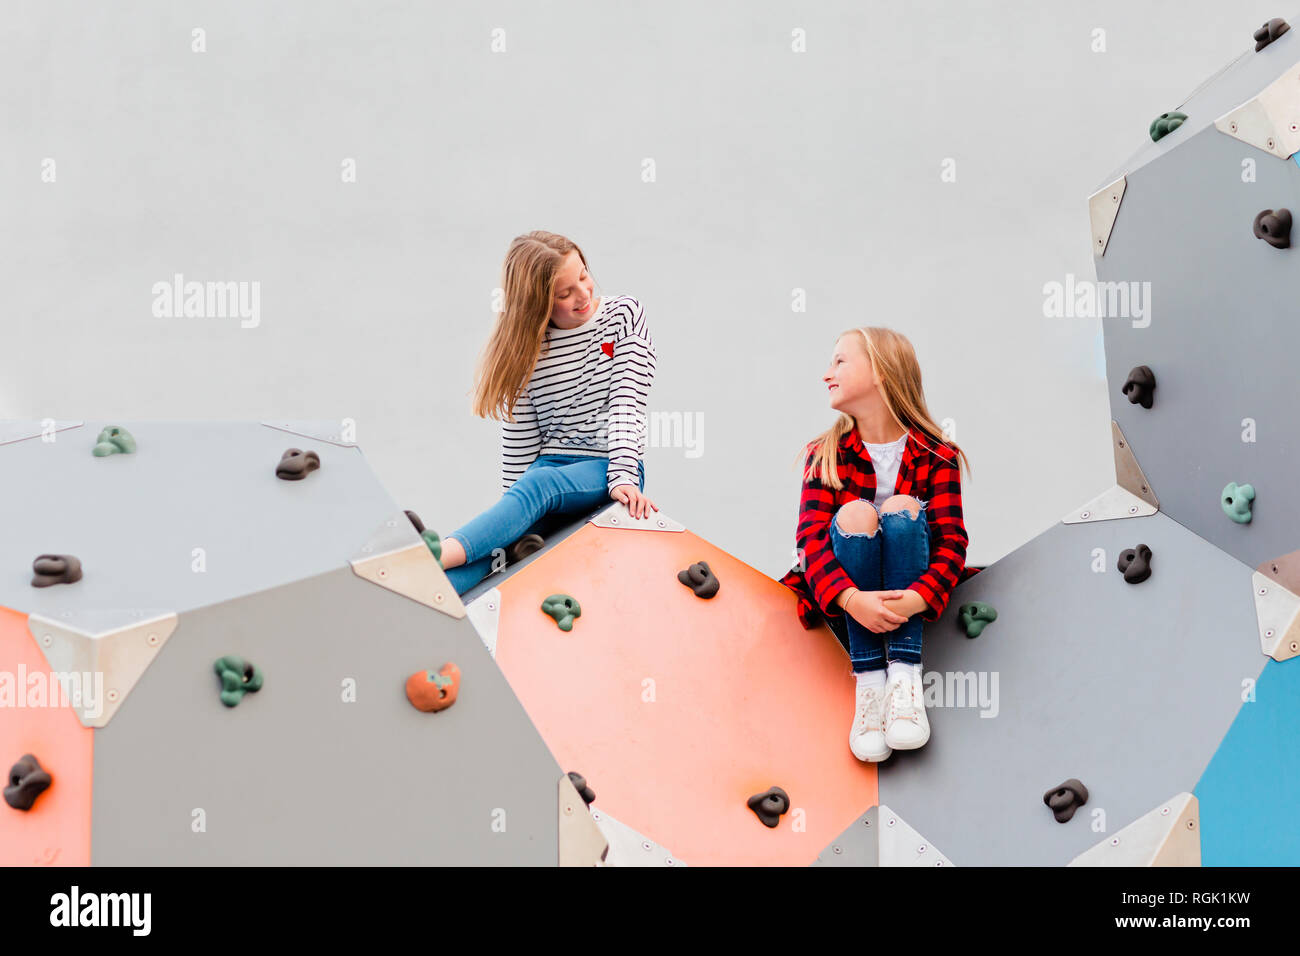 Two smiling girls in climbing gym Stock Photo